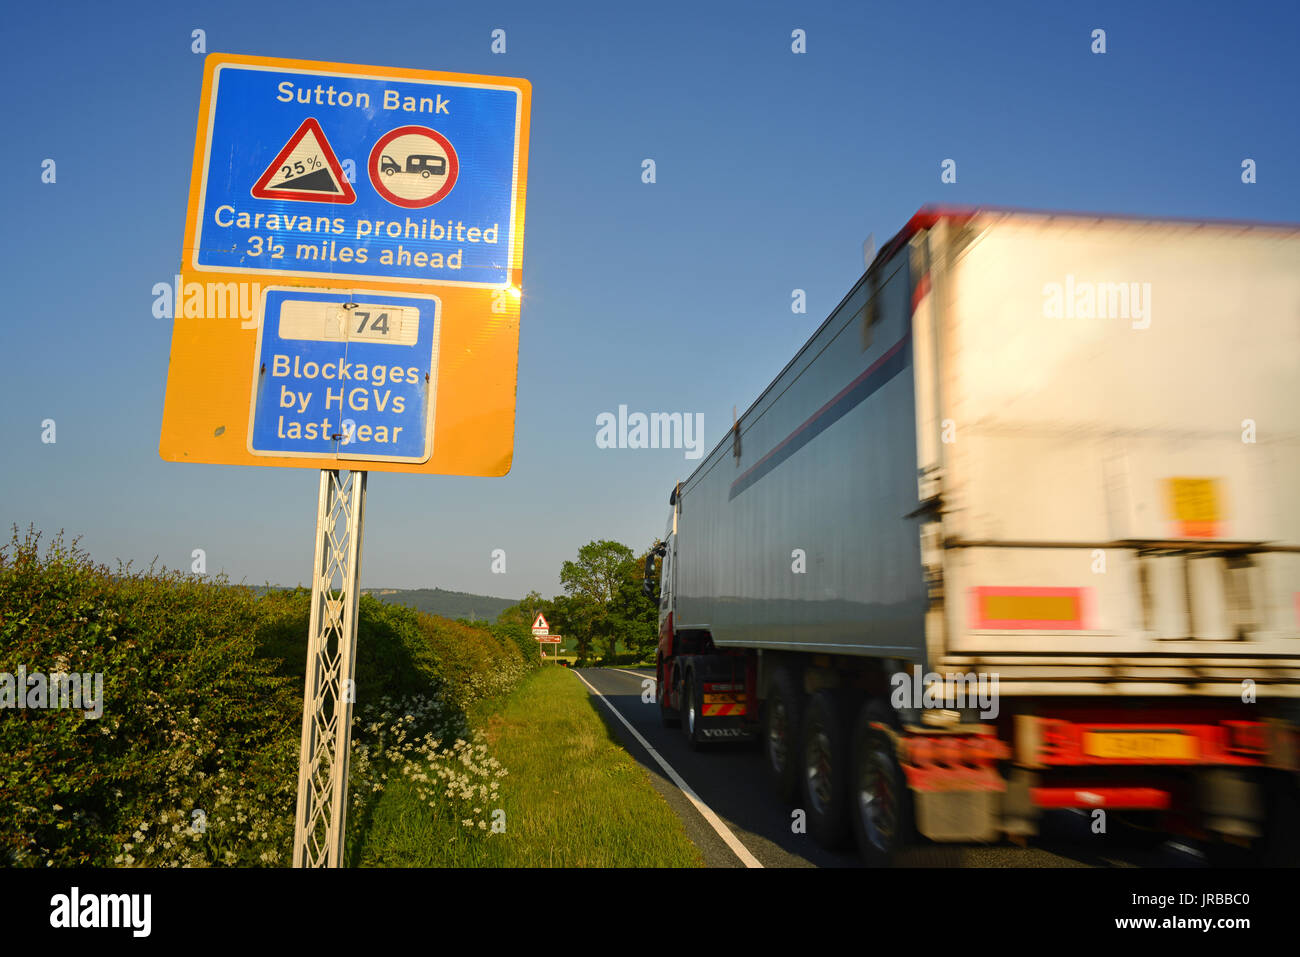 warning for hgv drivers of very steep hill, sutton bank ahead north yorkshire moors united kingdom Stock Photo